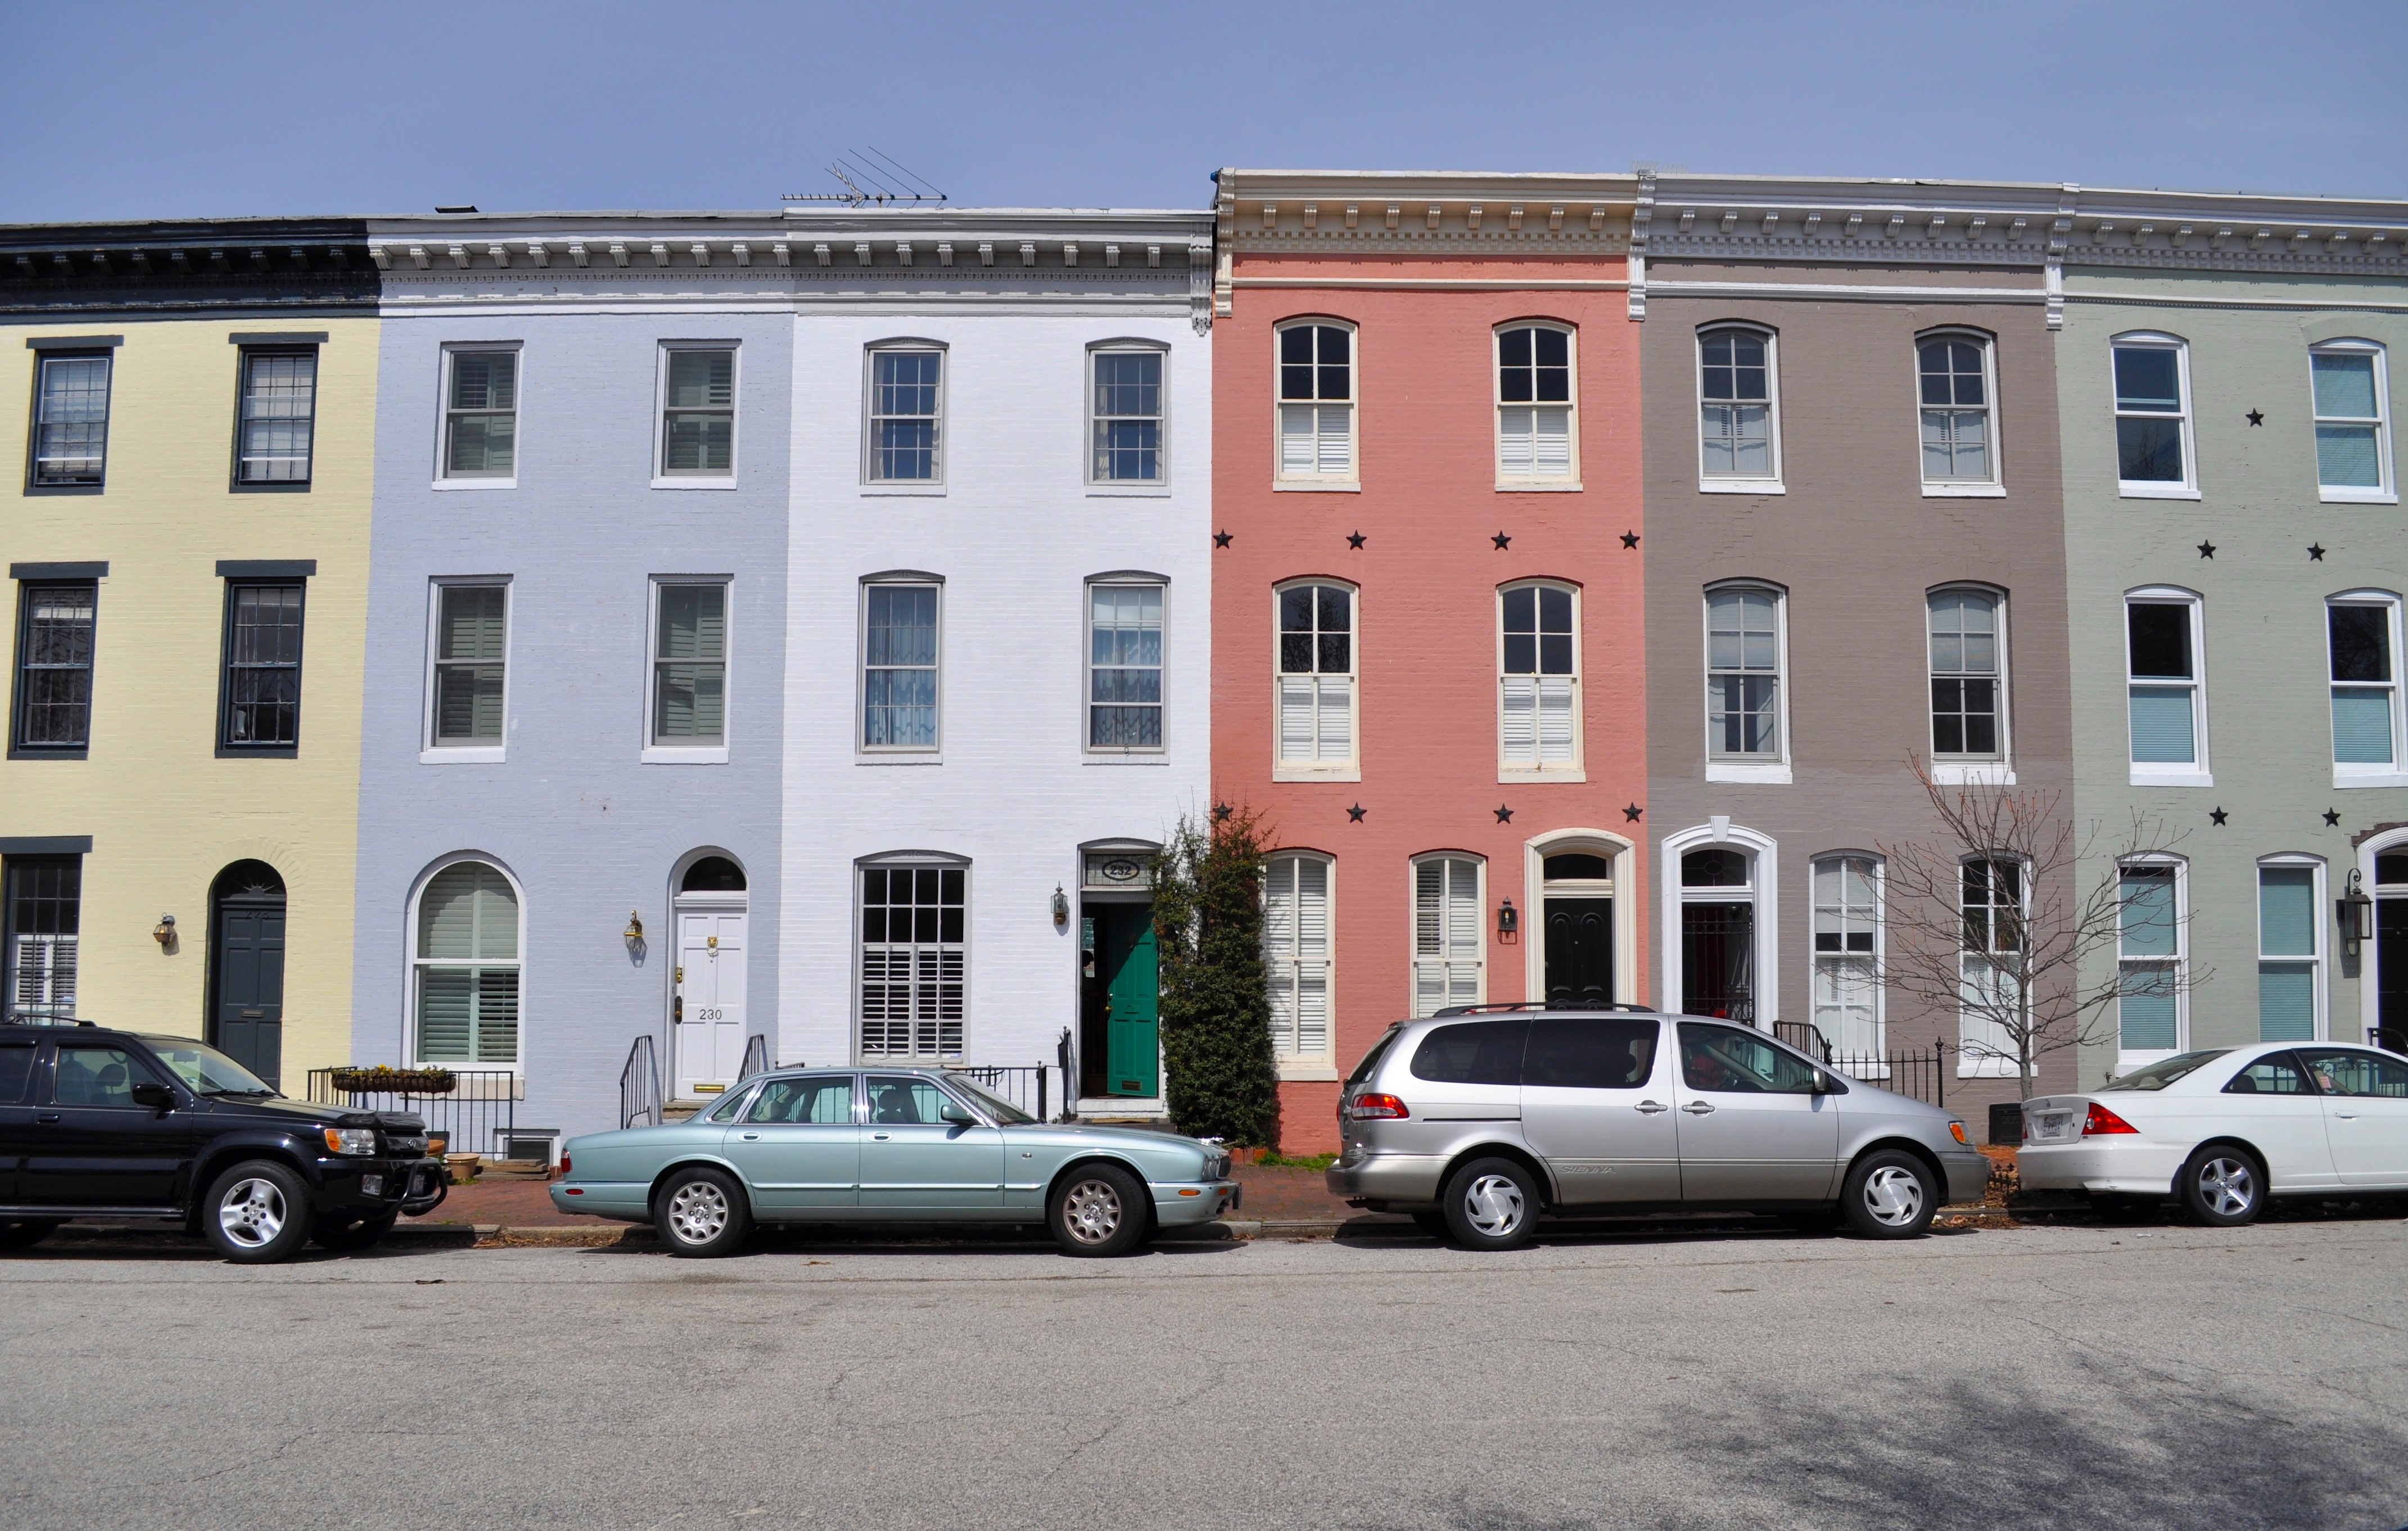 Colored Row Houses | something for the eyes . . . the photography of ...